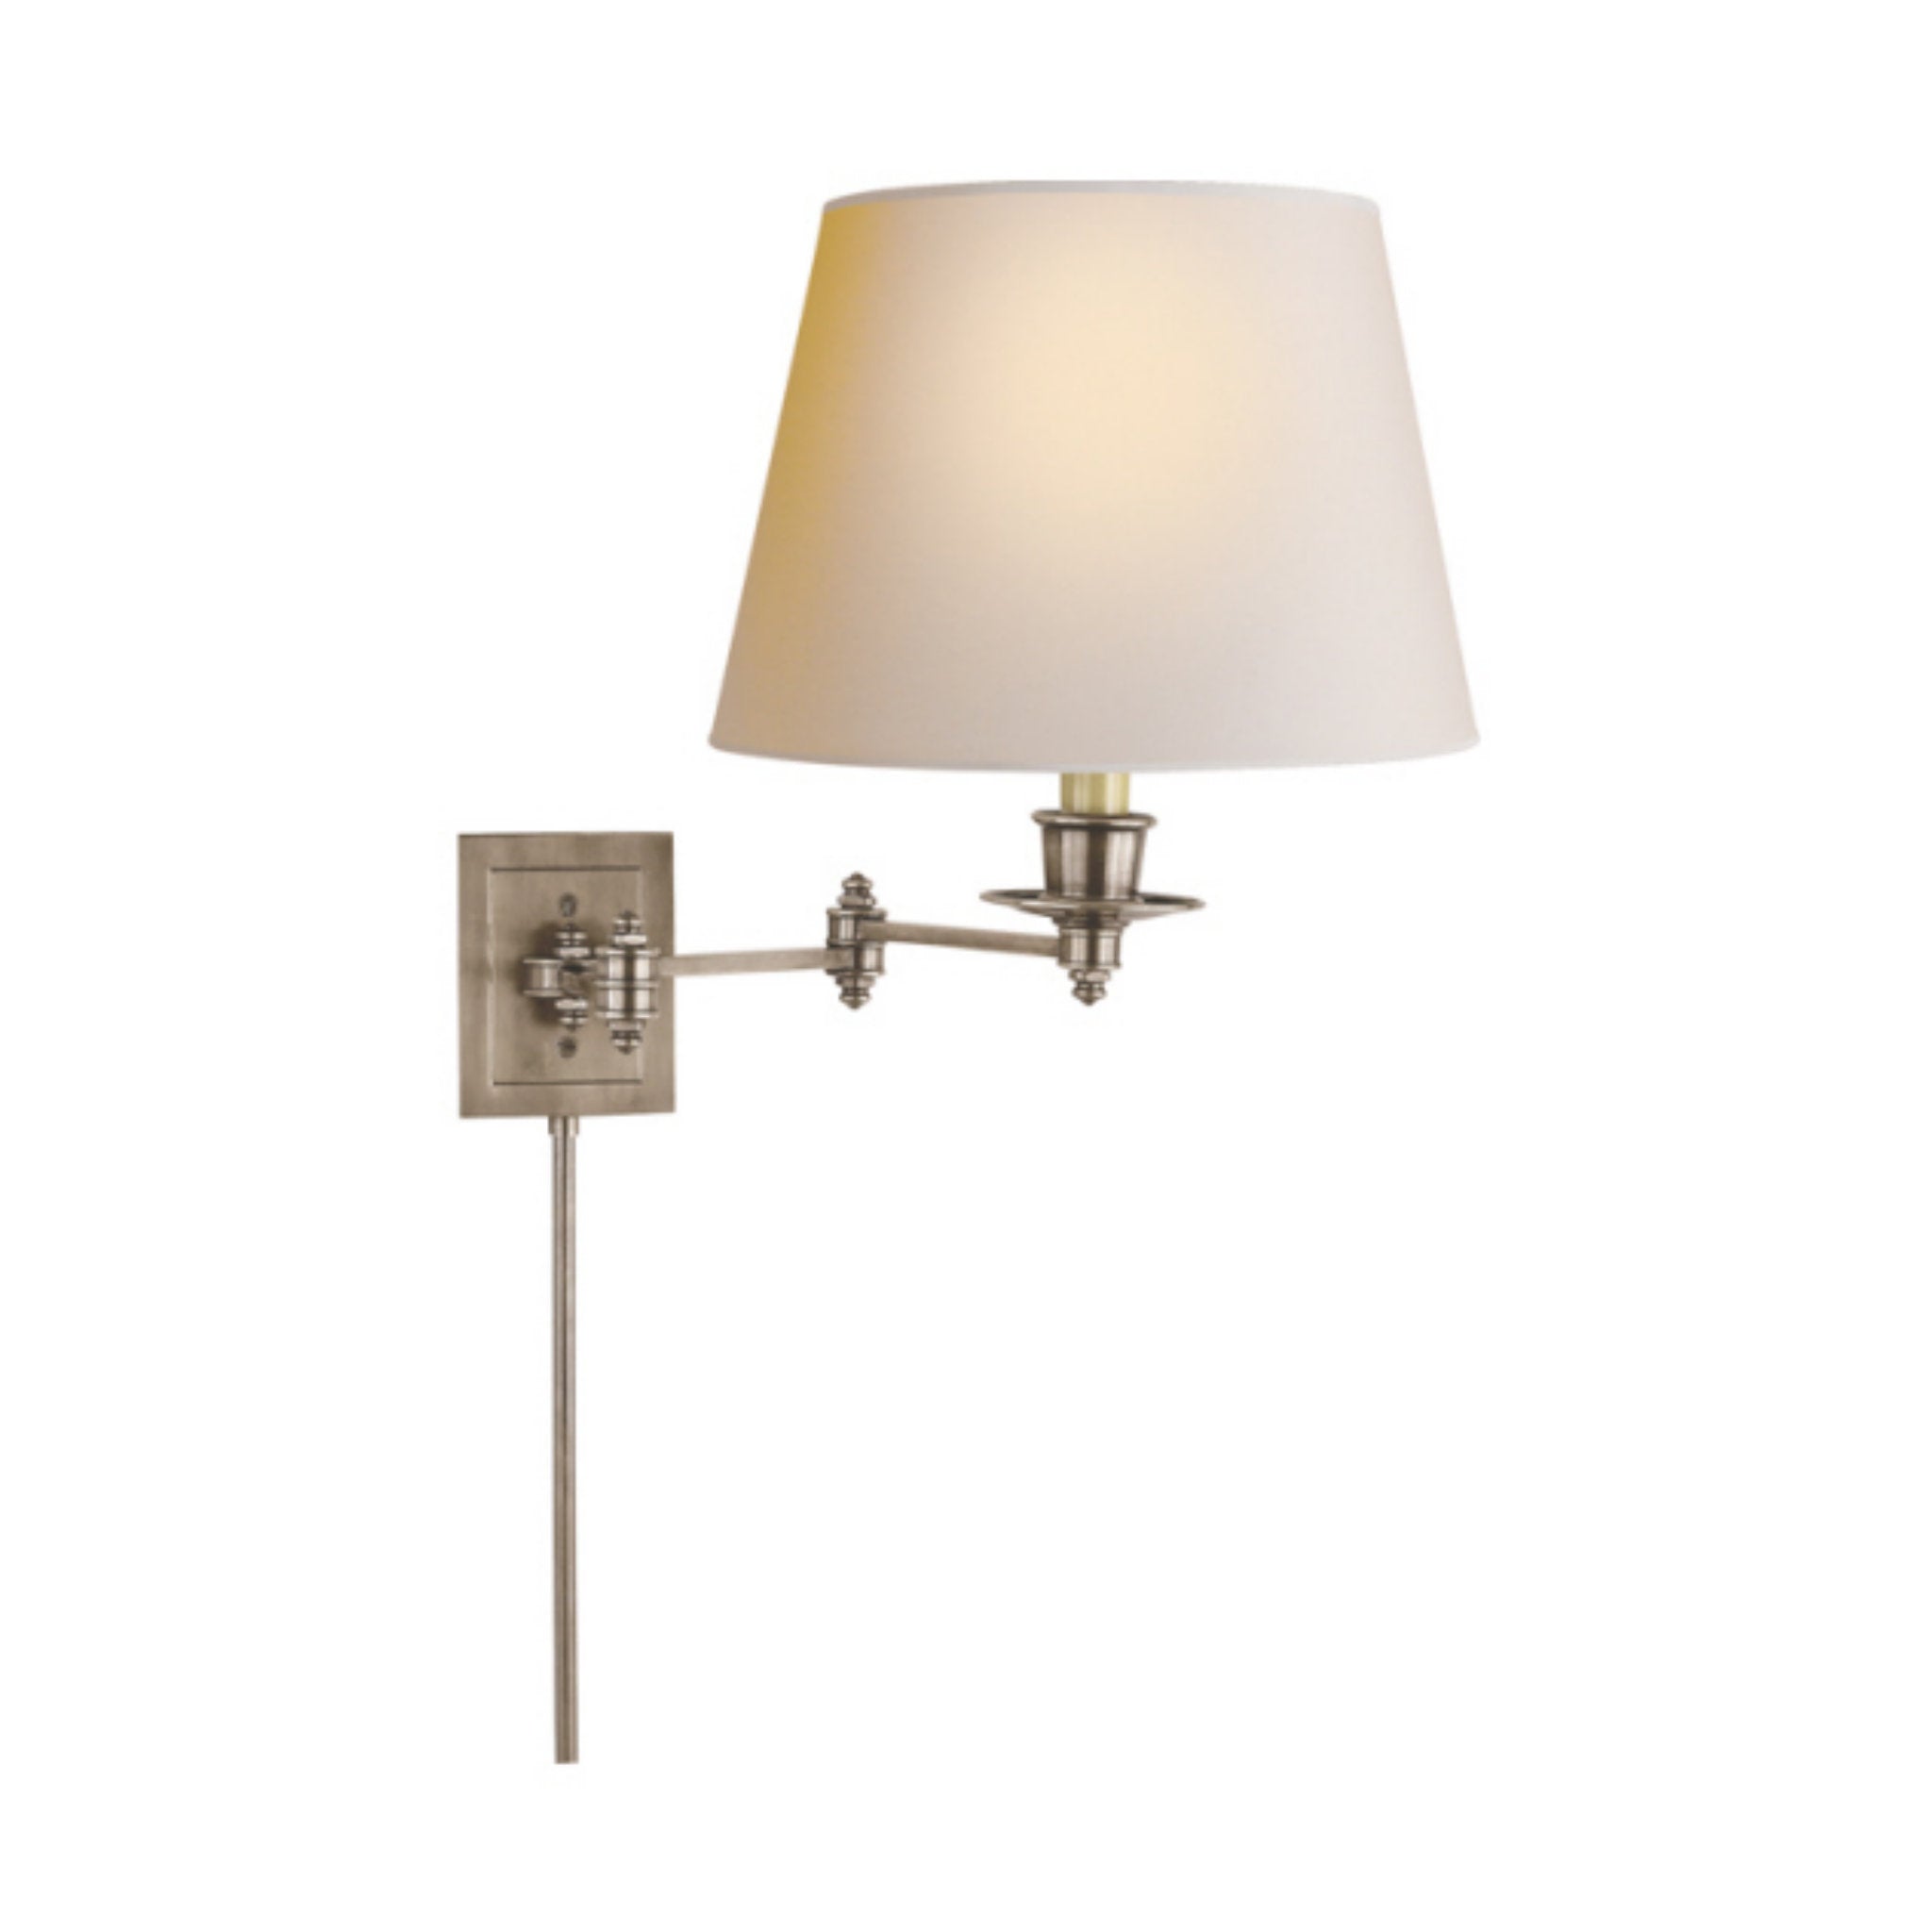 Visual Comfort Triple Swing Arm Wall Lamp in Antique Nickel with Natural Paper Shade